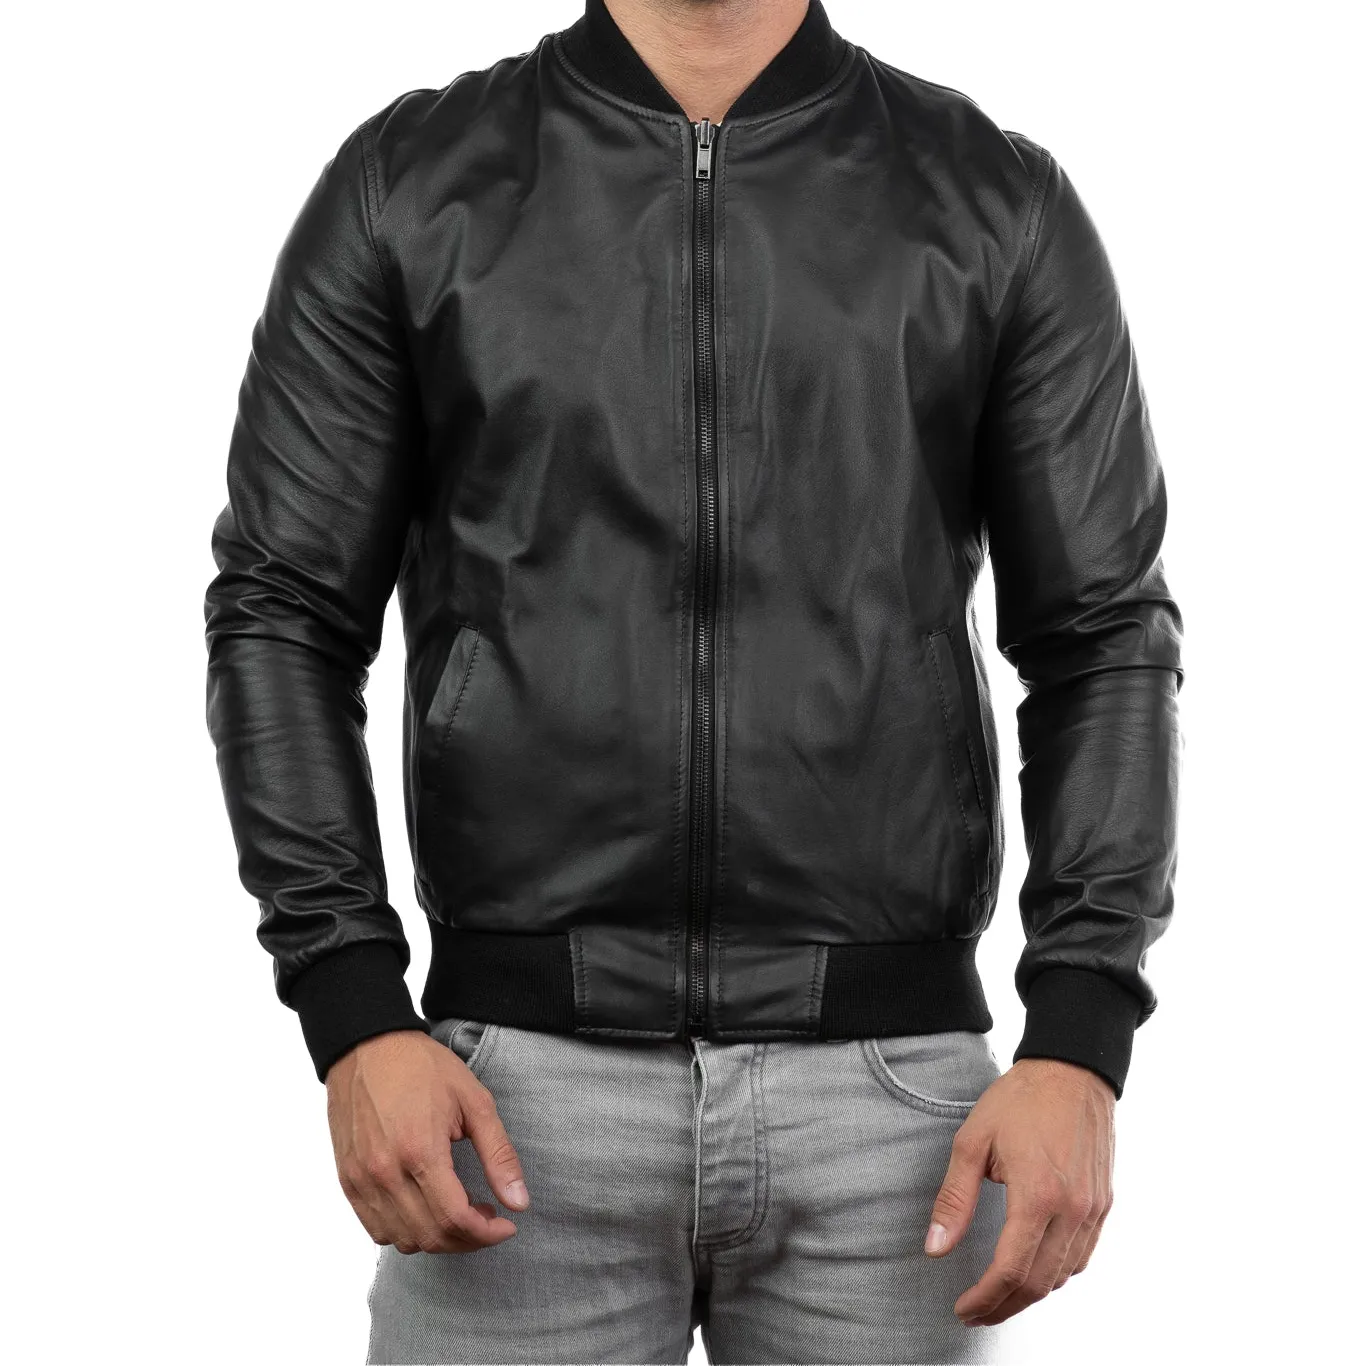 Fast selling Man Leather Jacket Genuine lambskin With Zip Customizable - Handcrafted in Italy for export